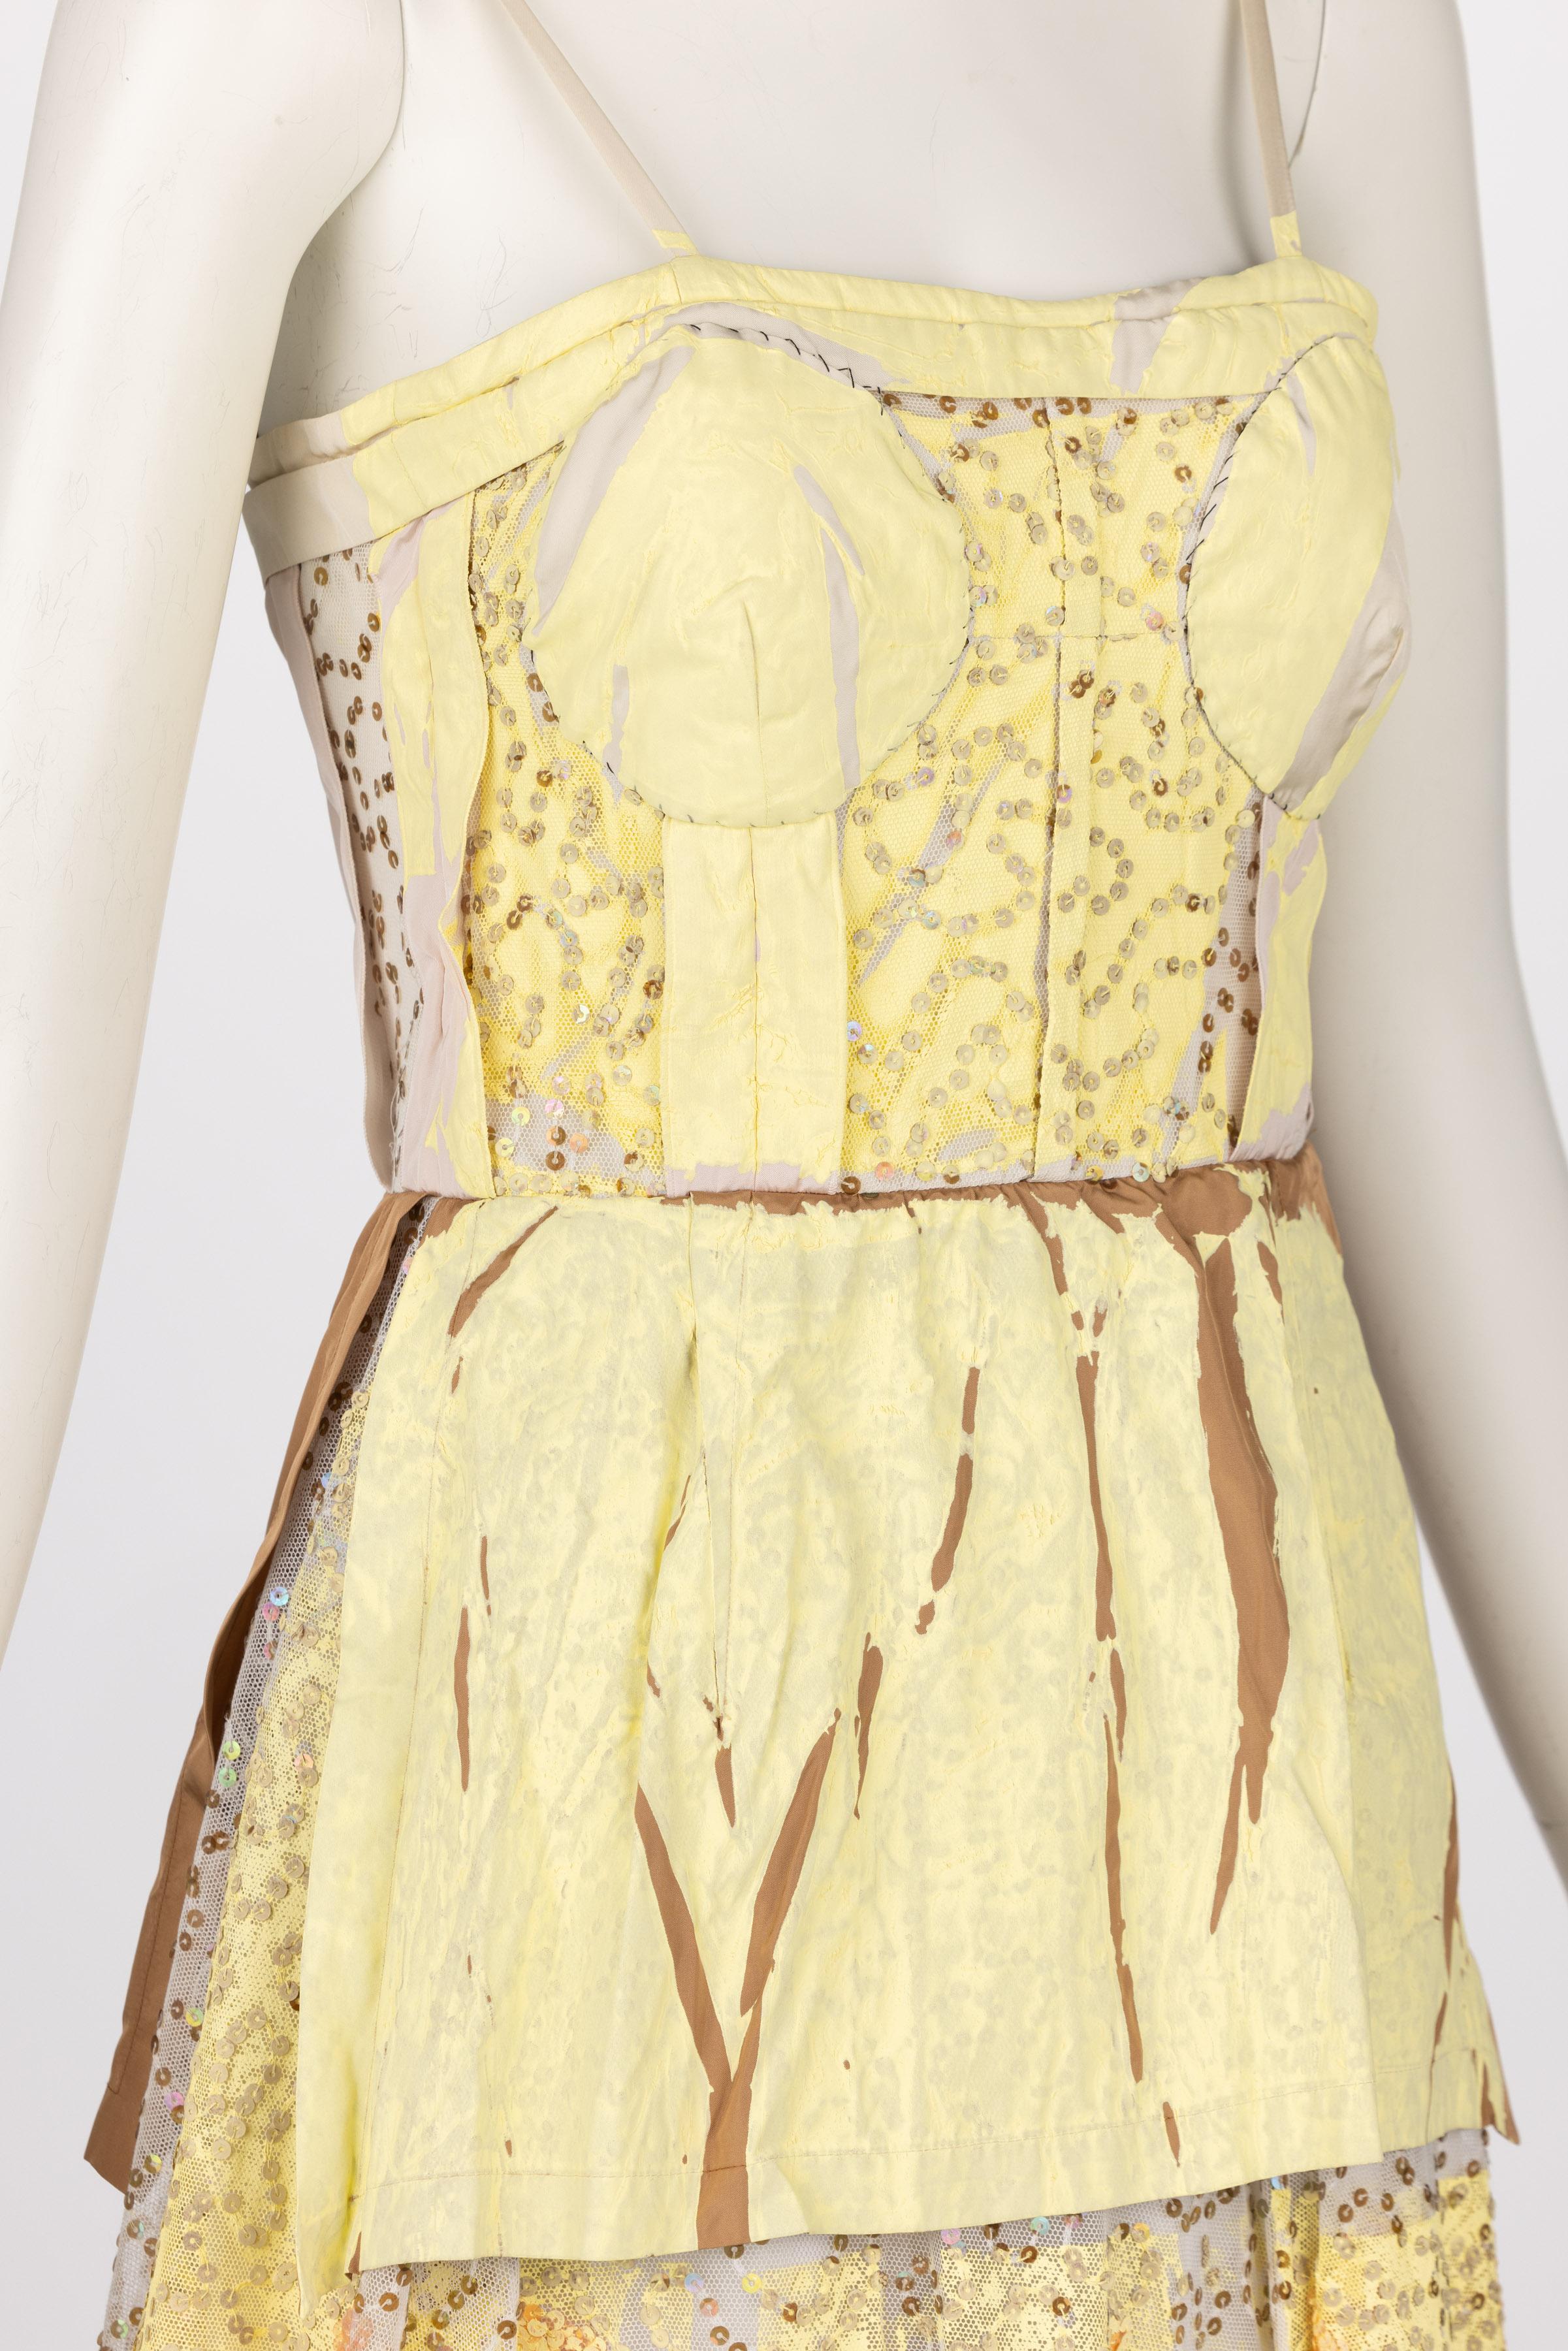 Marni Spring 2019 Runway Yellow Sequins Sleeveless Dress For Sale 6